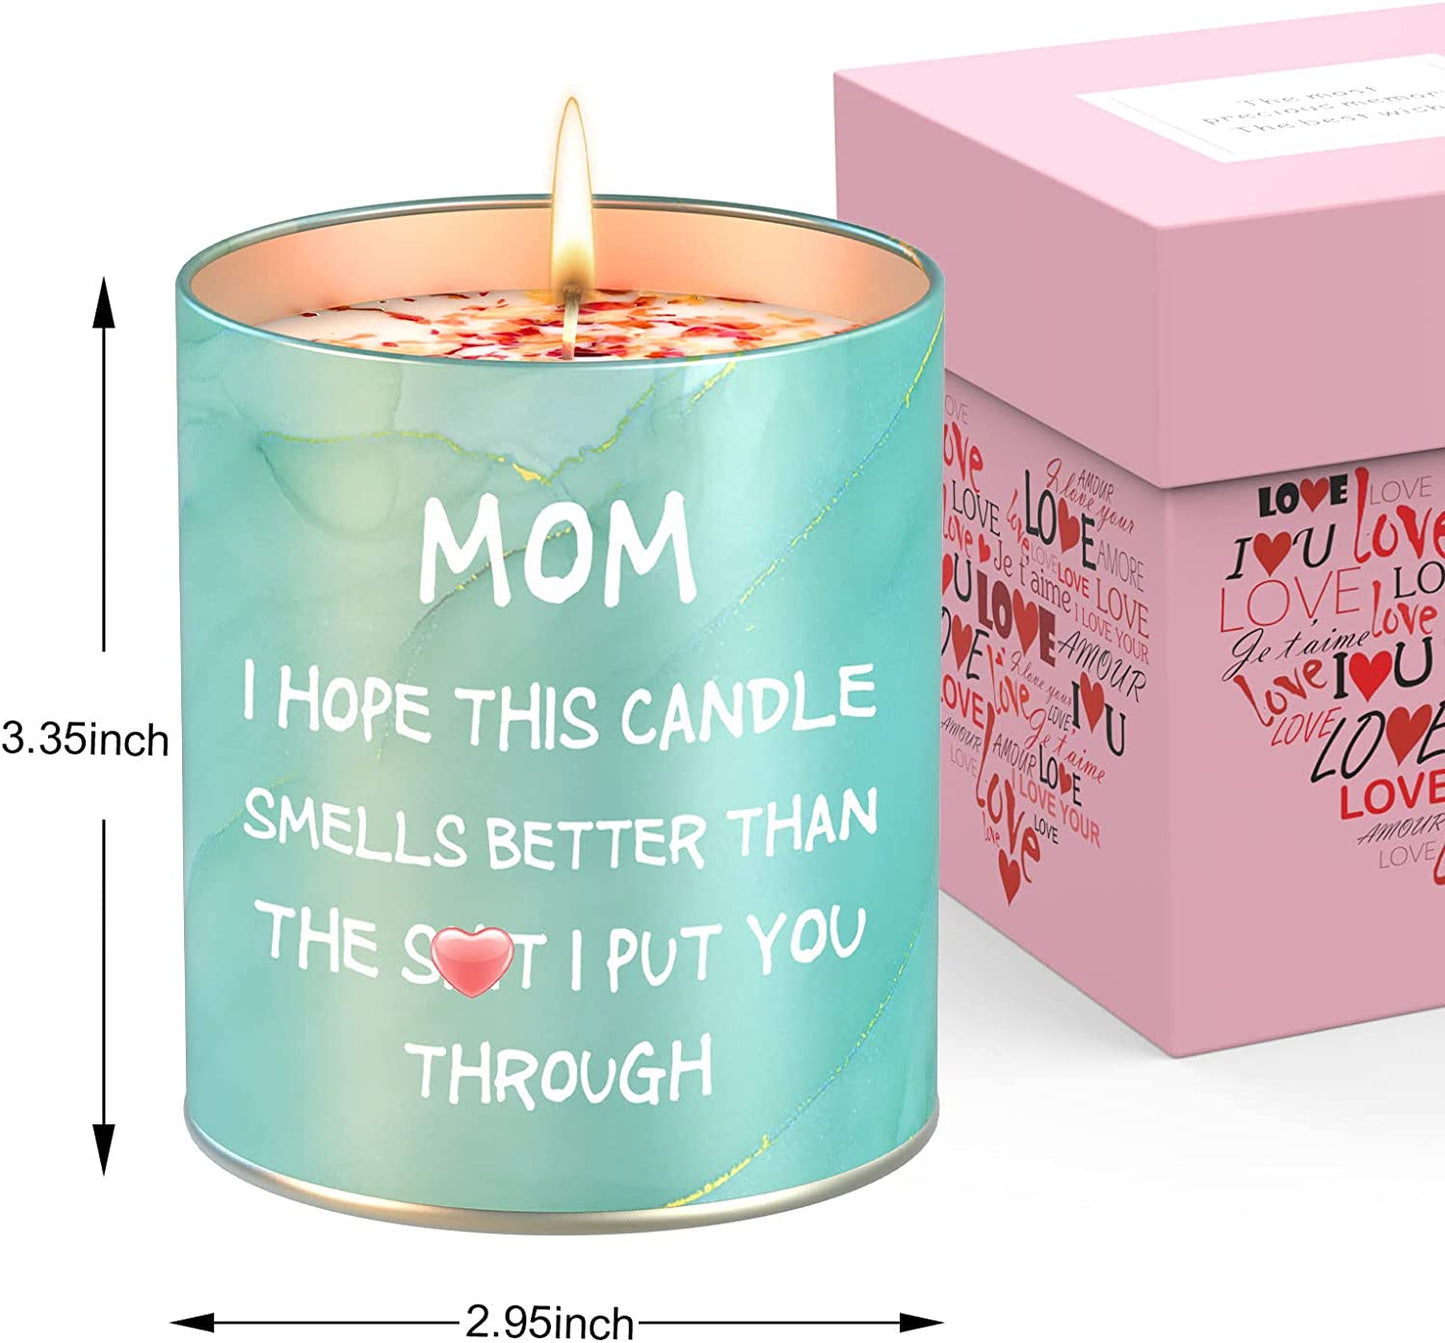 Gifts for Mom, Mothers Day Gifts for Mom, Mom Gifts from Daughter Son, Funny Christmas Birthday Gifts for Mom, Great Mother Gifts Ideas, Scented Candles